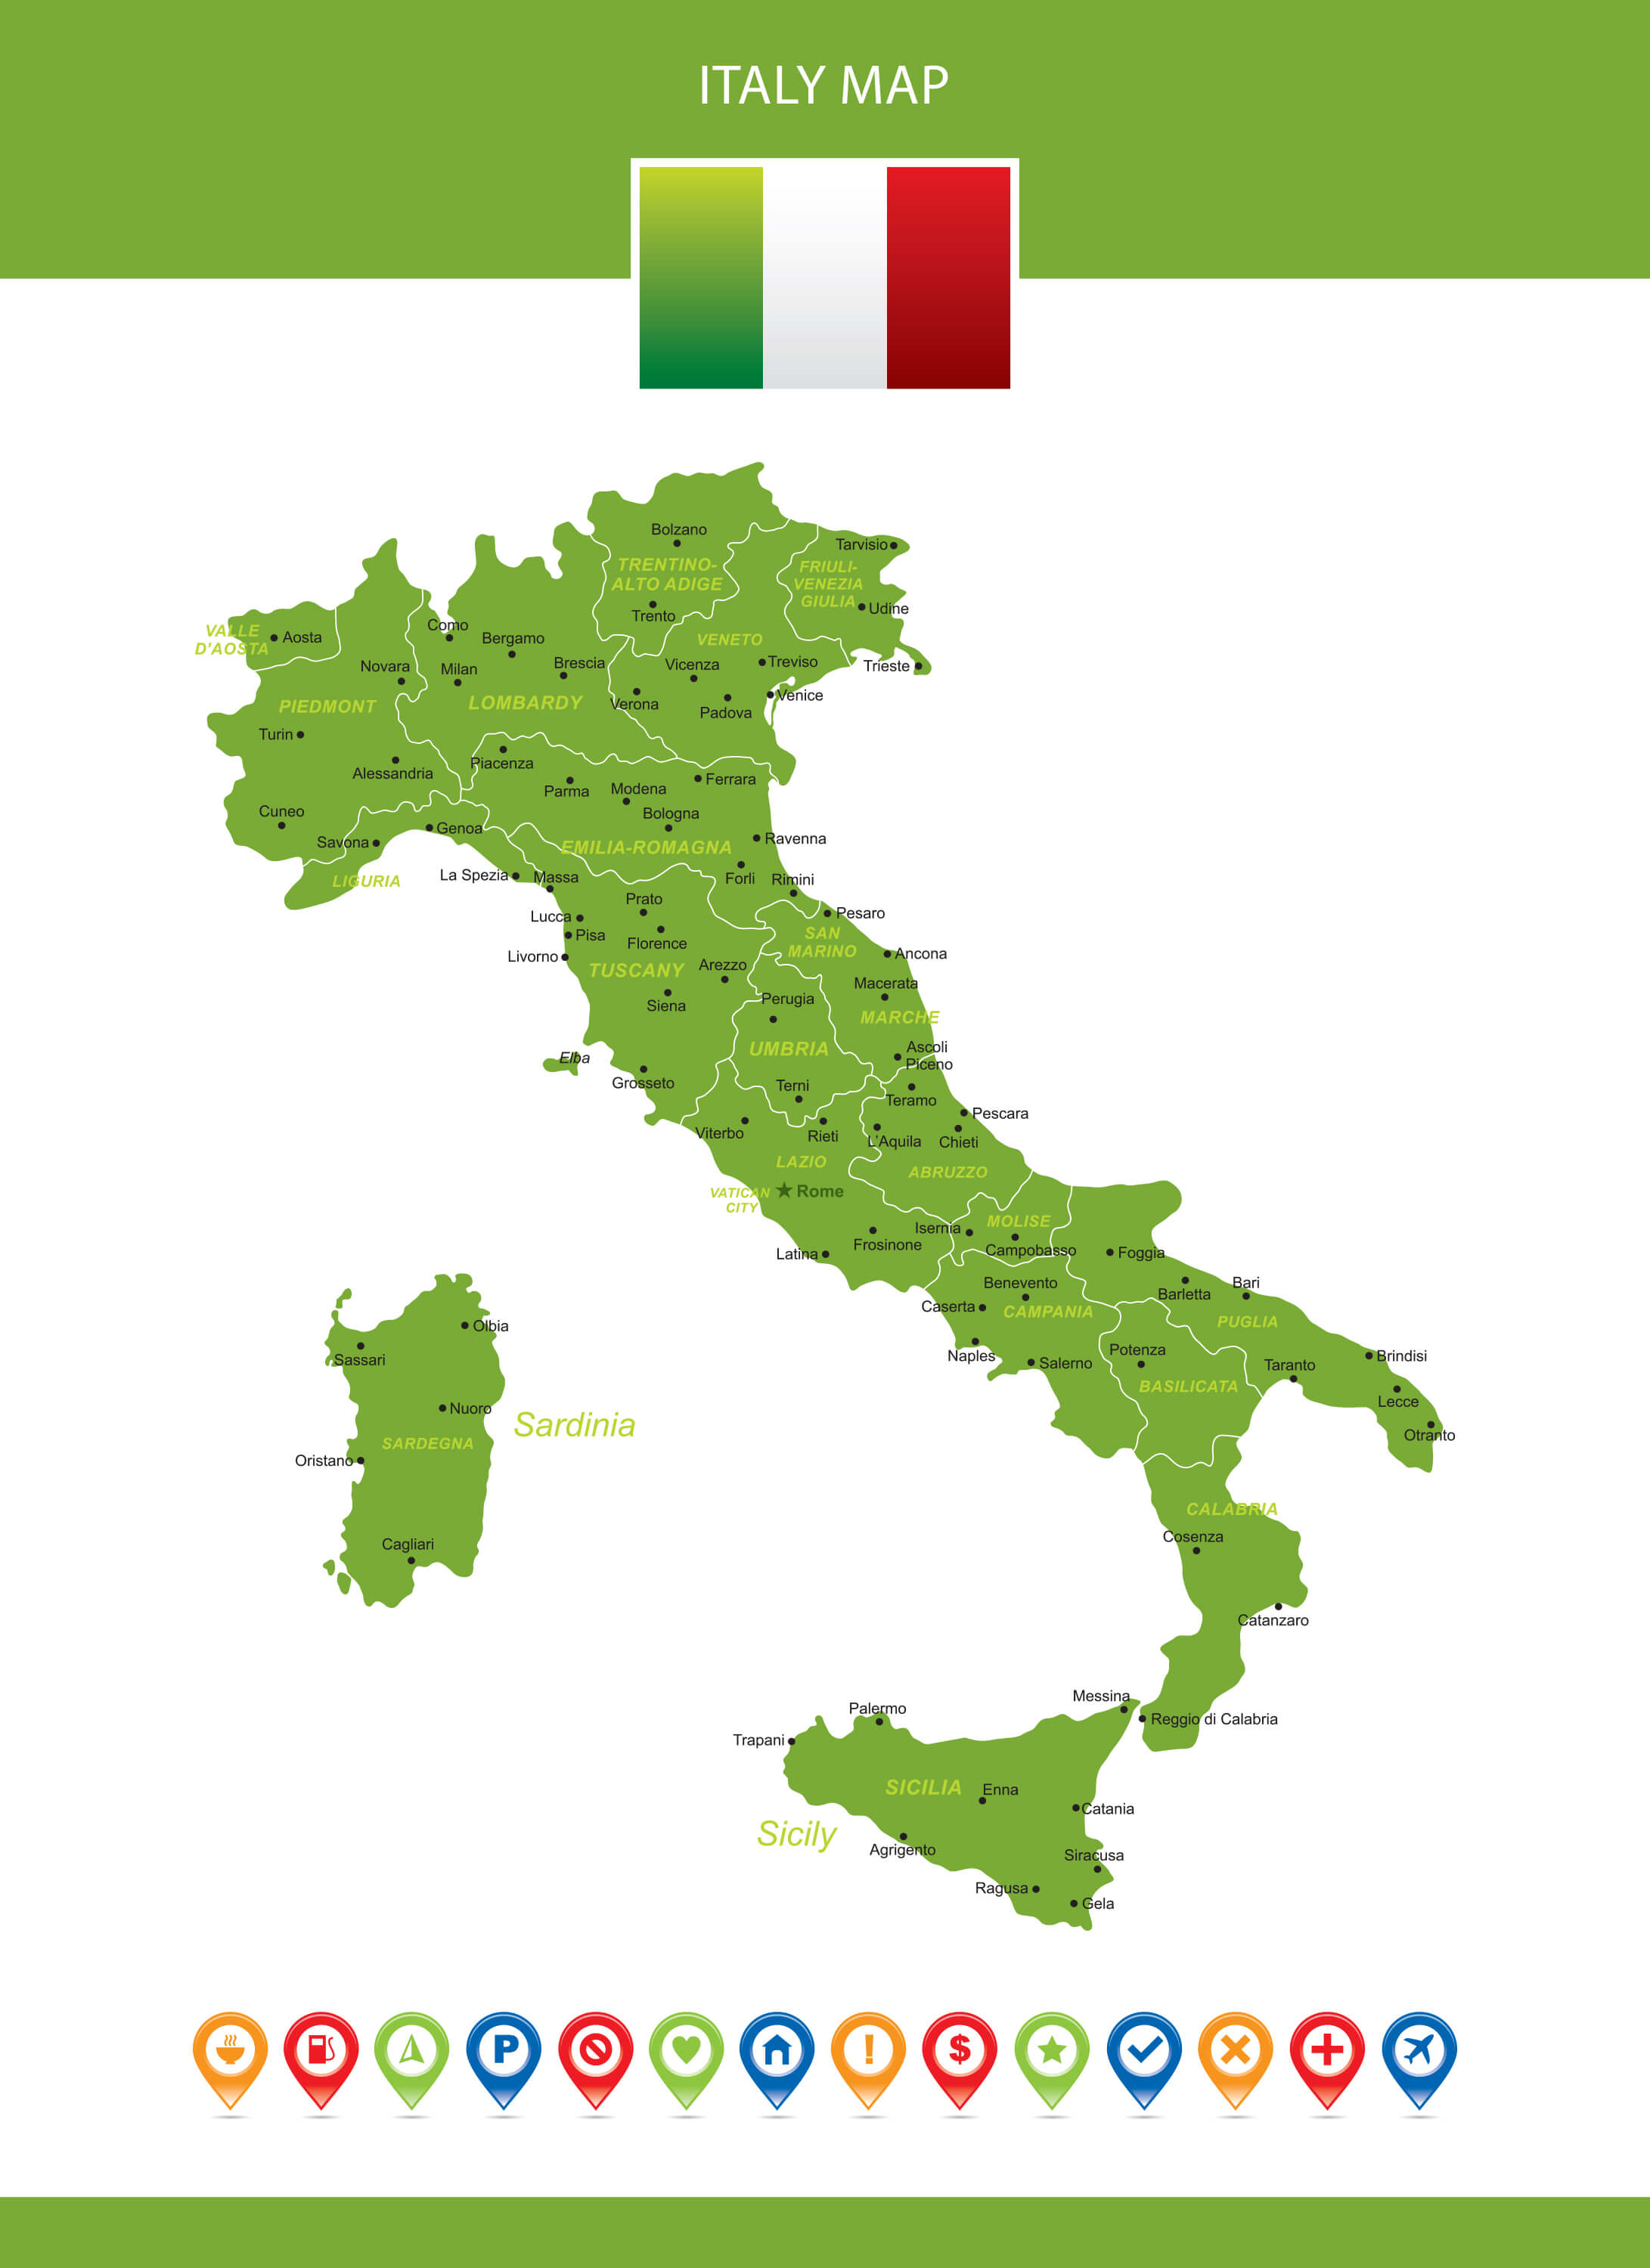 Italy Map with Major Cities